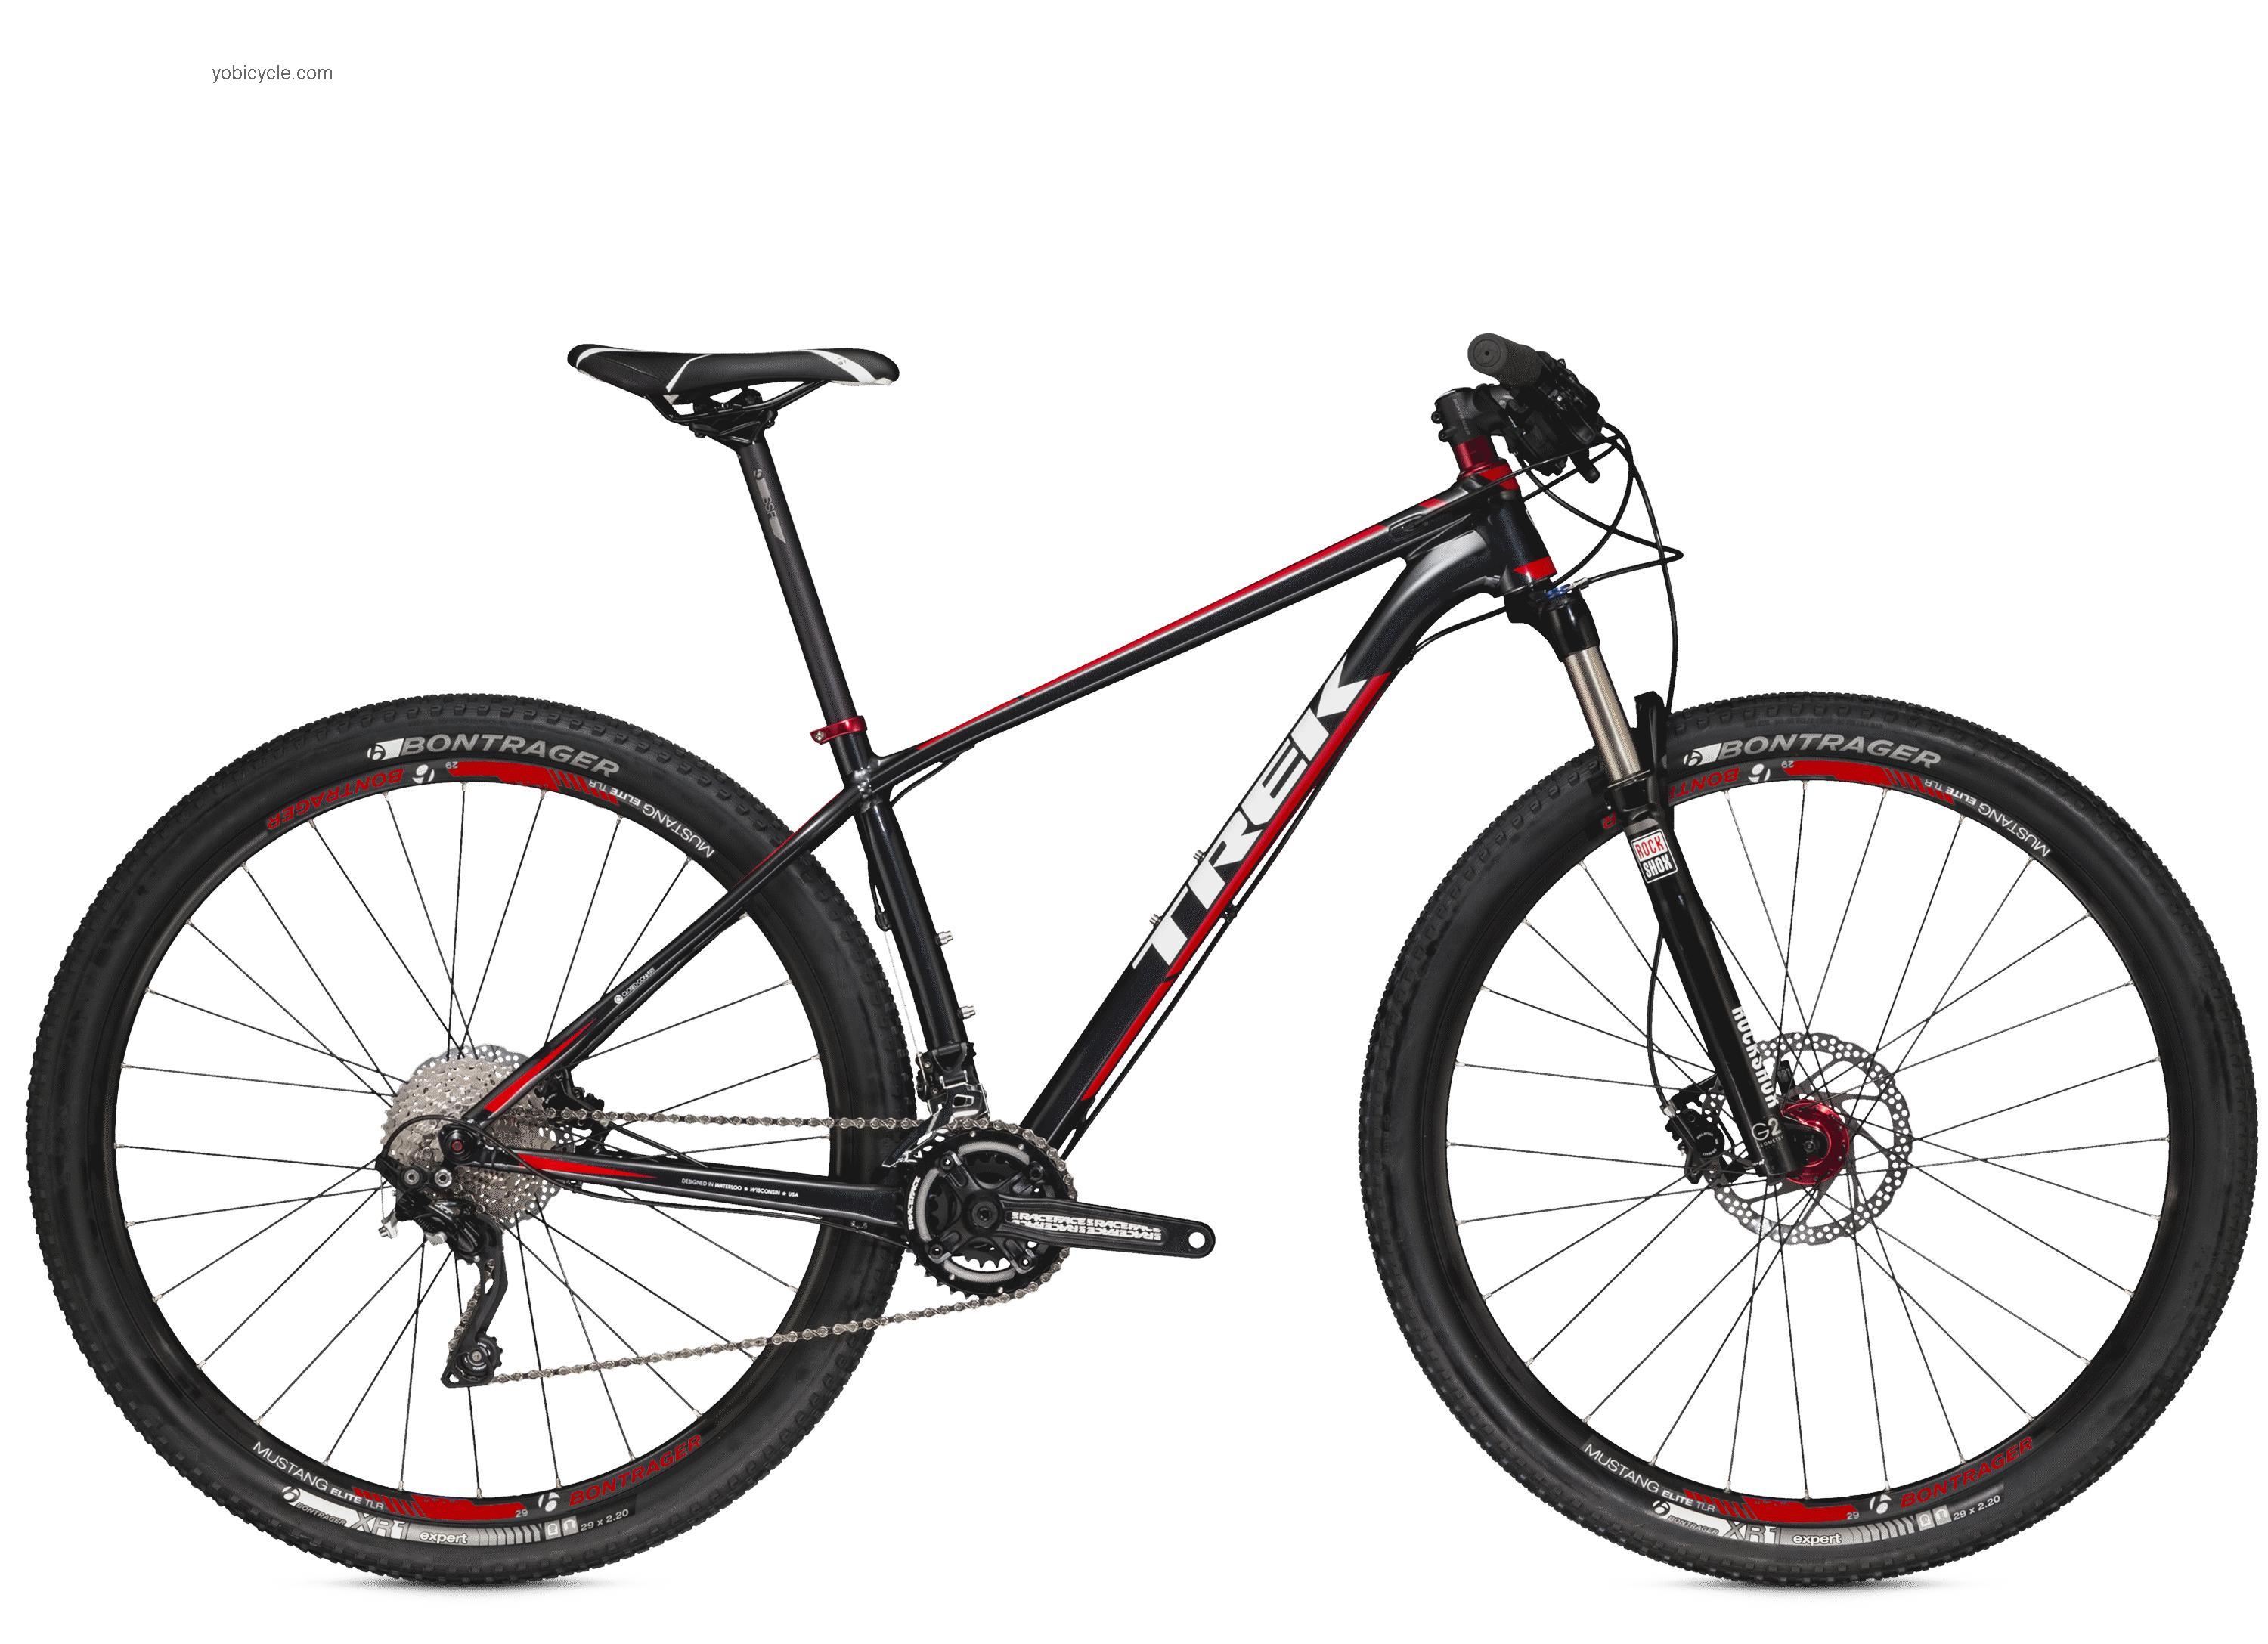 Trek Superfly 5 2015 comparison online with competitors